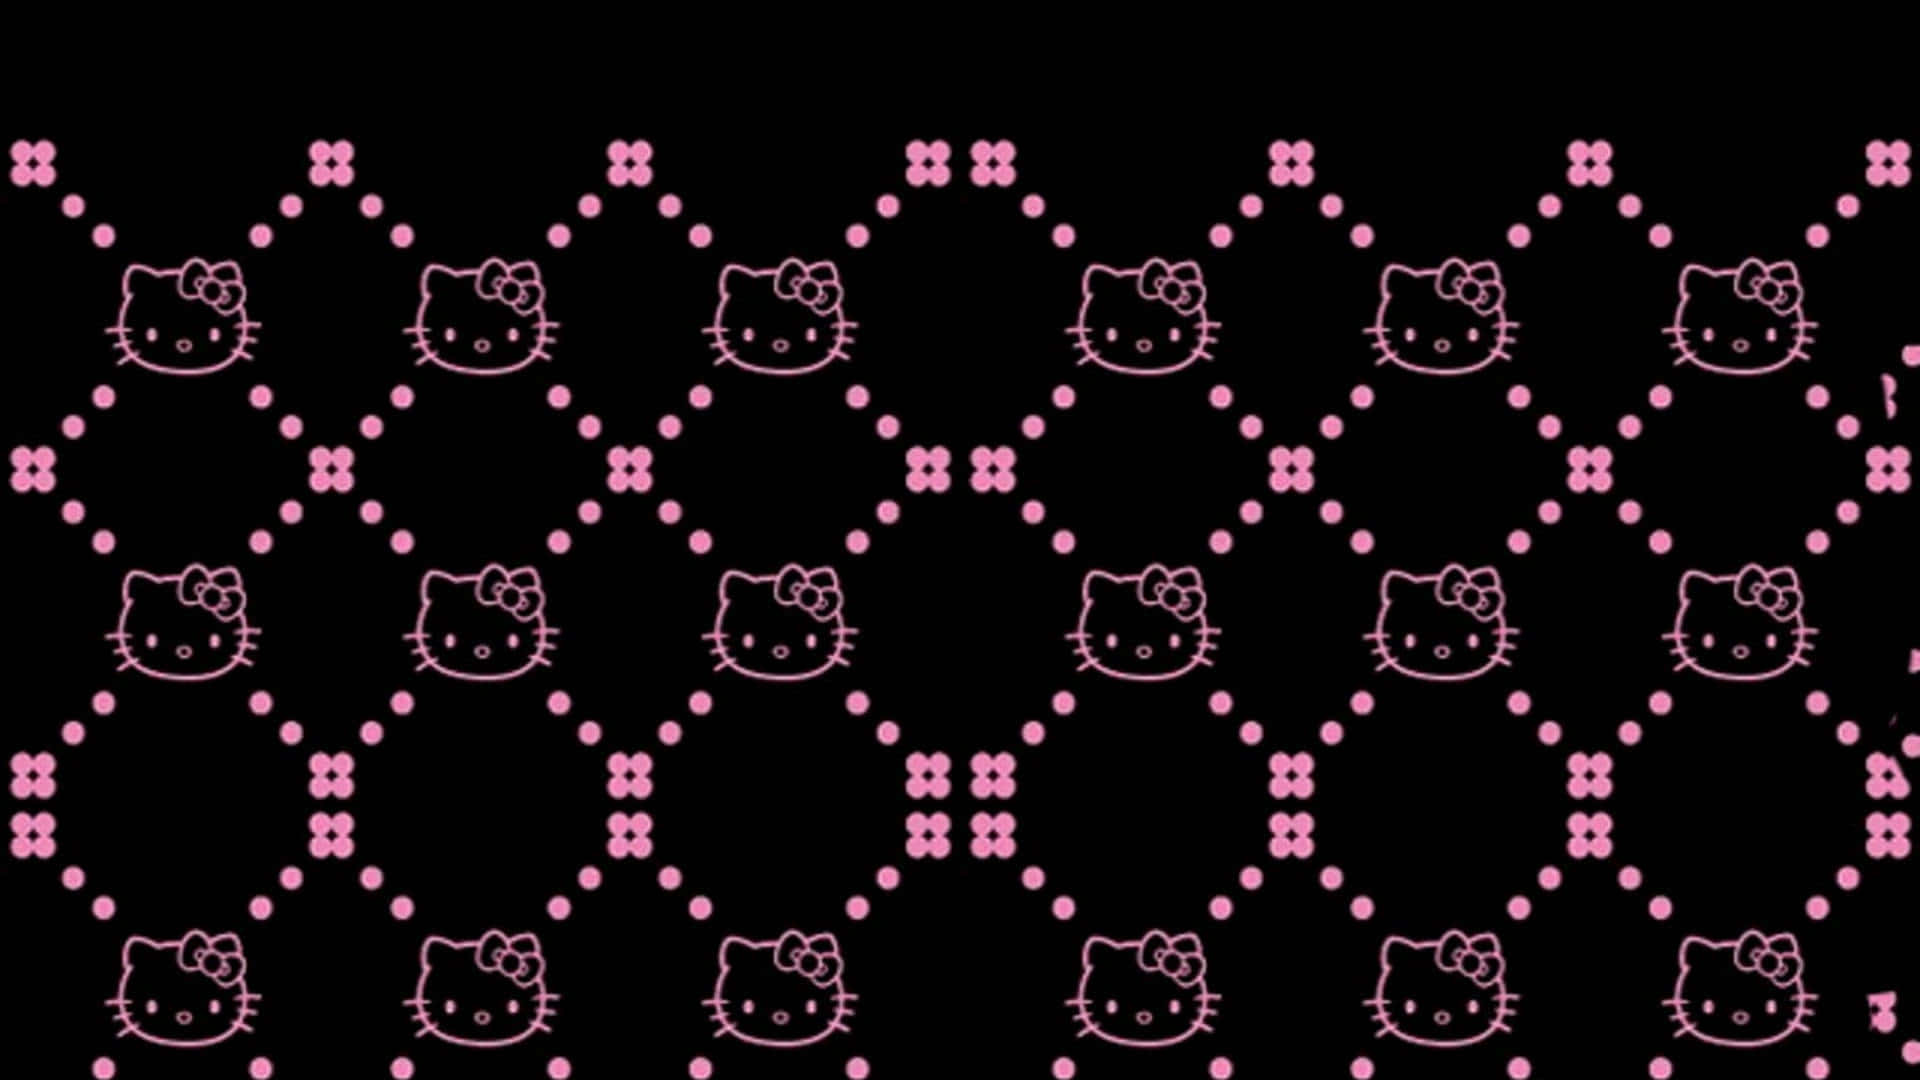 Emo Hello Kitty wearing a sad expression Wallpaper